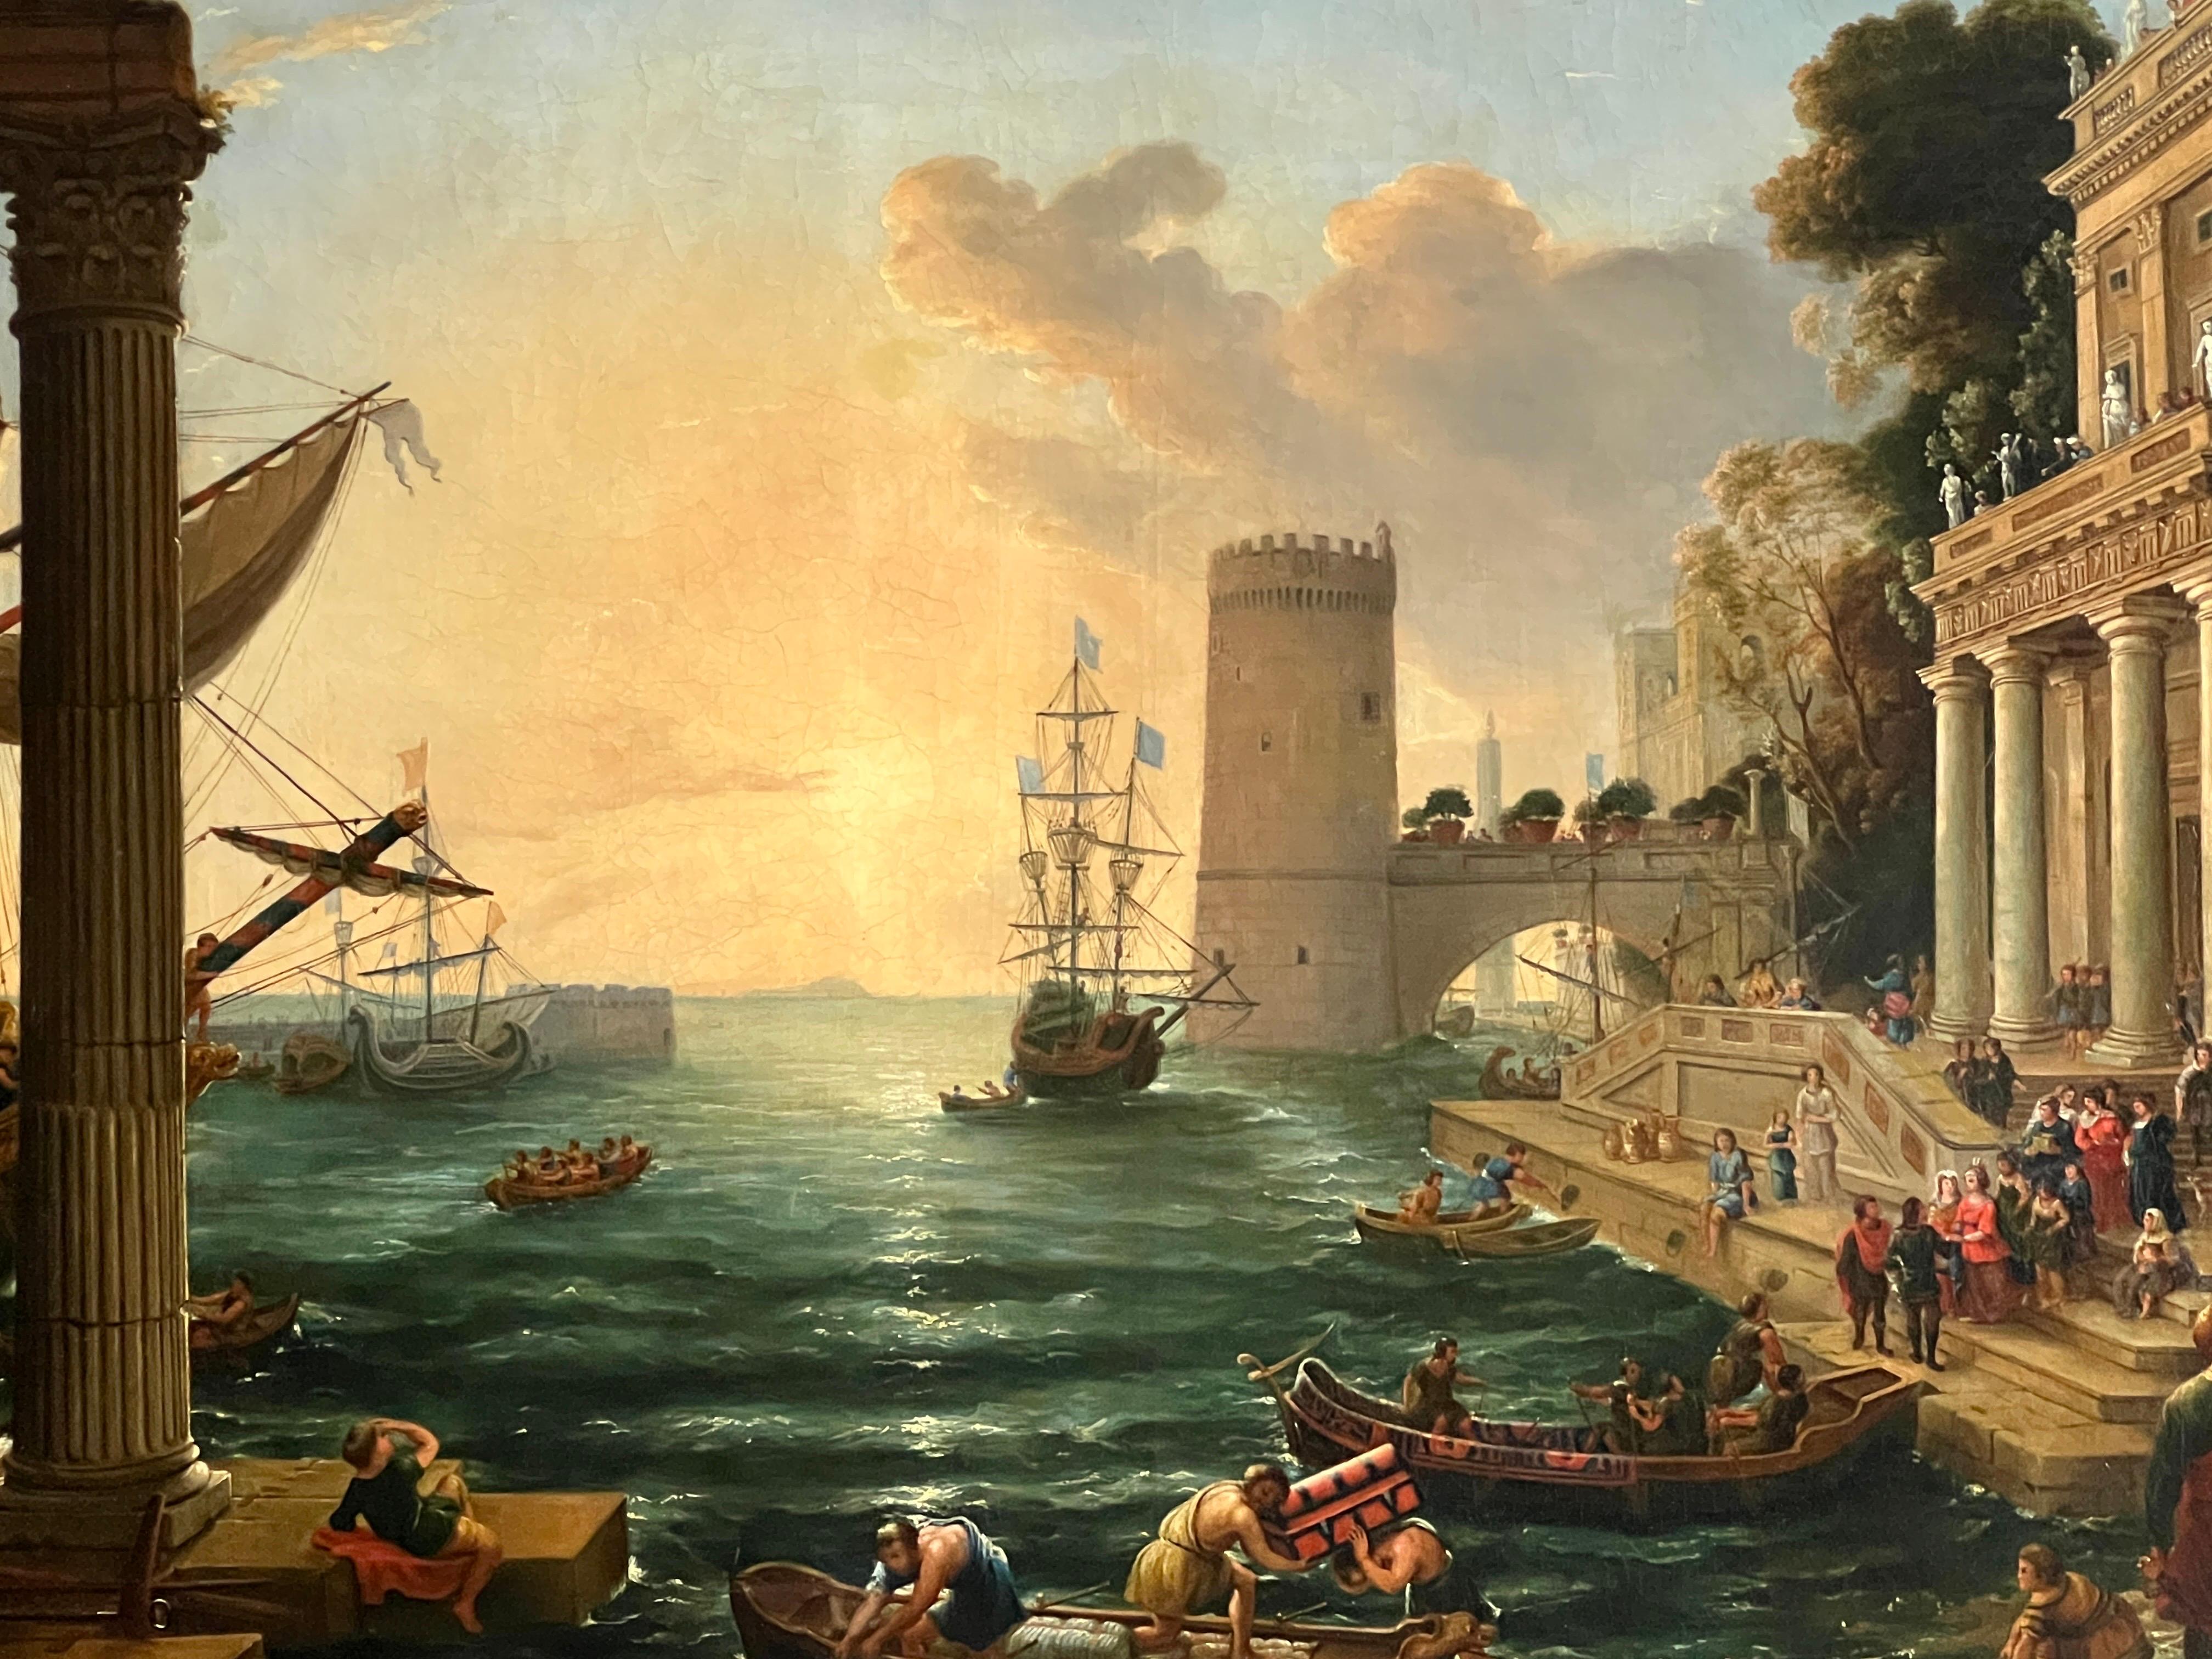 After Claude Lorrain - Embarkation of the Queen of Sheba. The original painting which was painted in 1648 is housed in the National Gallery, London. This piece was likely done as a Grand Tour souvenir in the mid 19th century. Large scale and fine